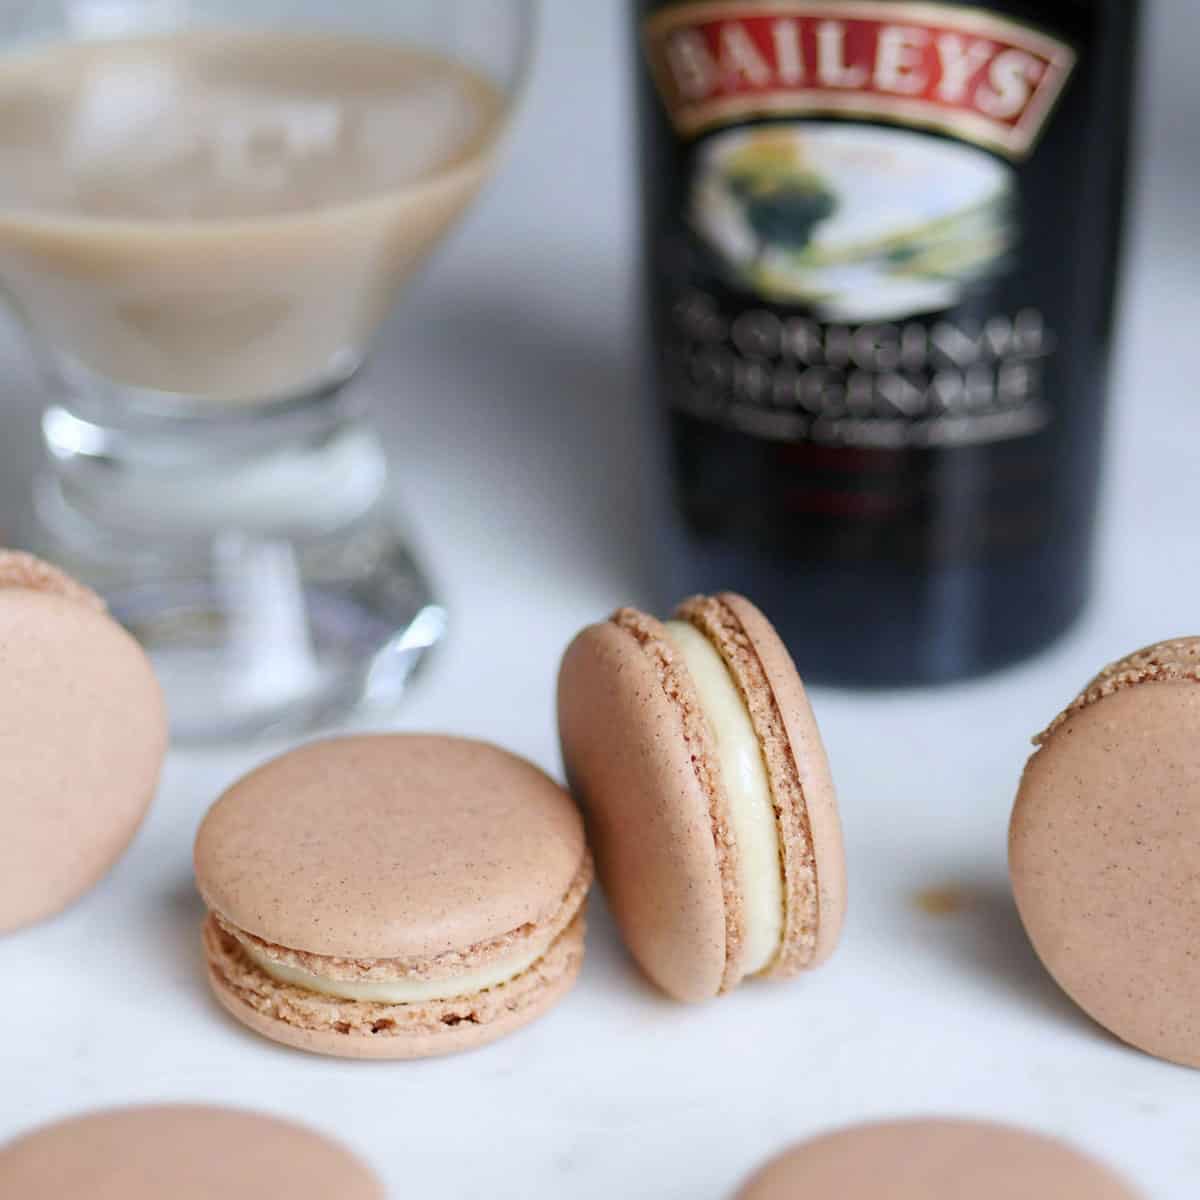 Baileys Irish Cream macarons with a bottle of coffee cream whisky in the back.